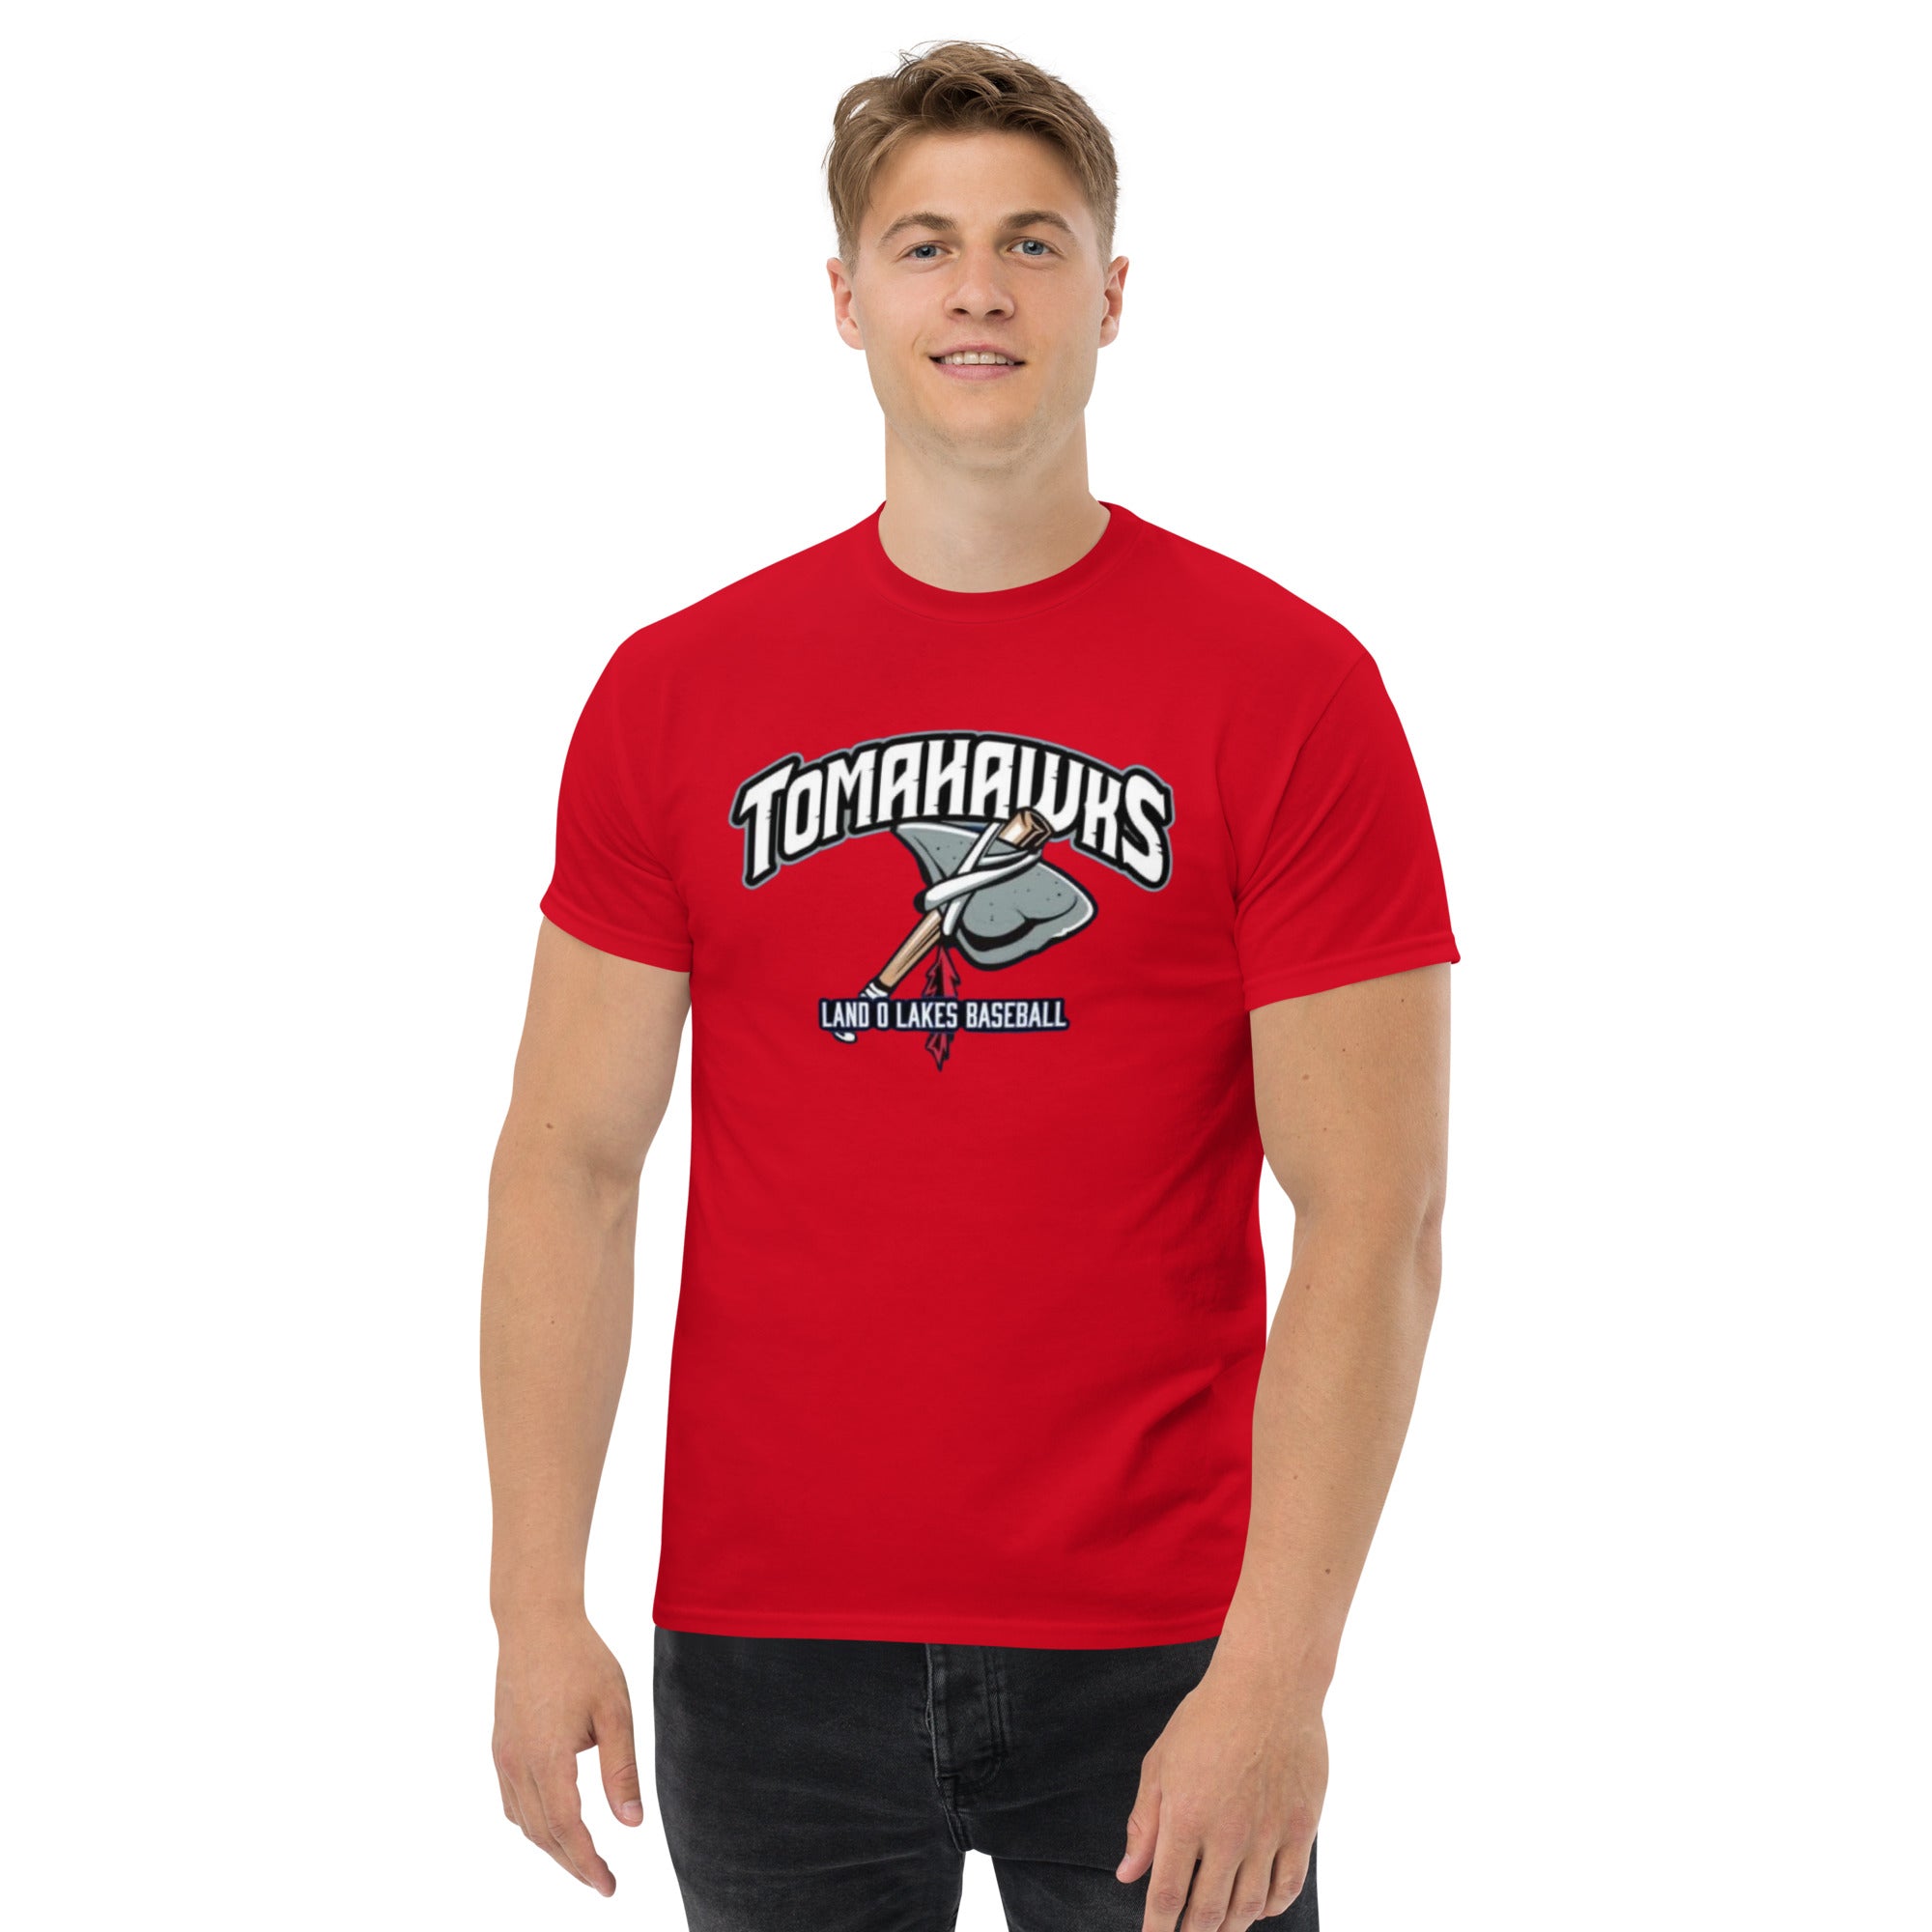 LOL Tomahawks Personalized Player Men's classic tee